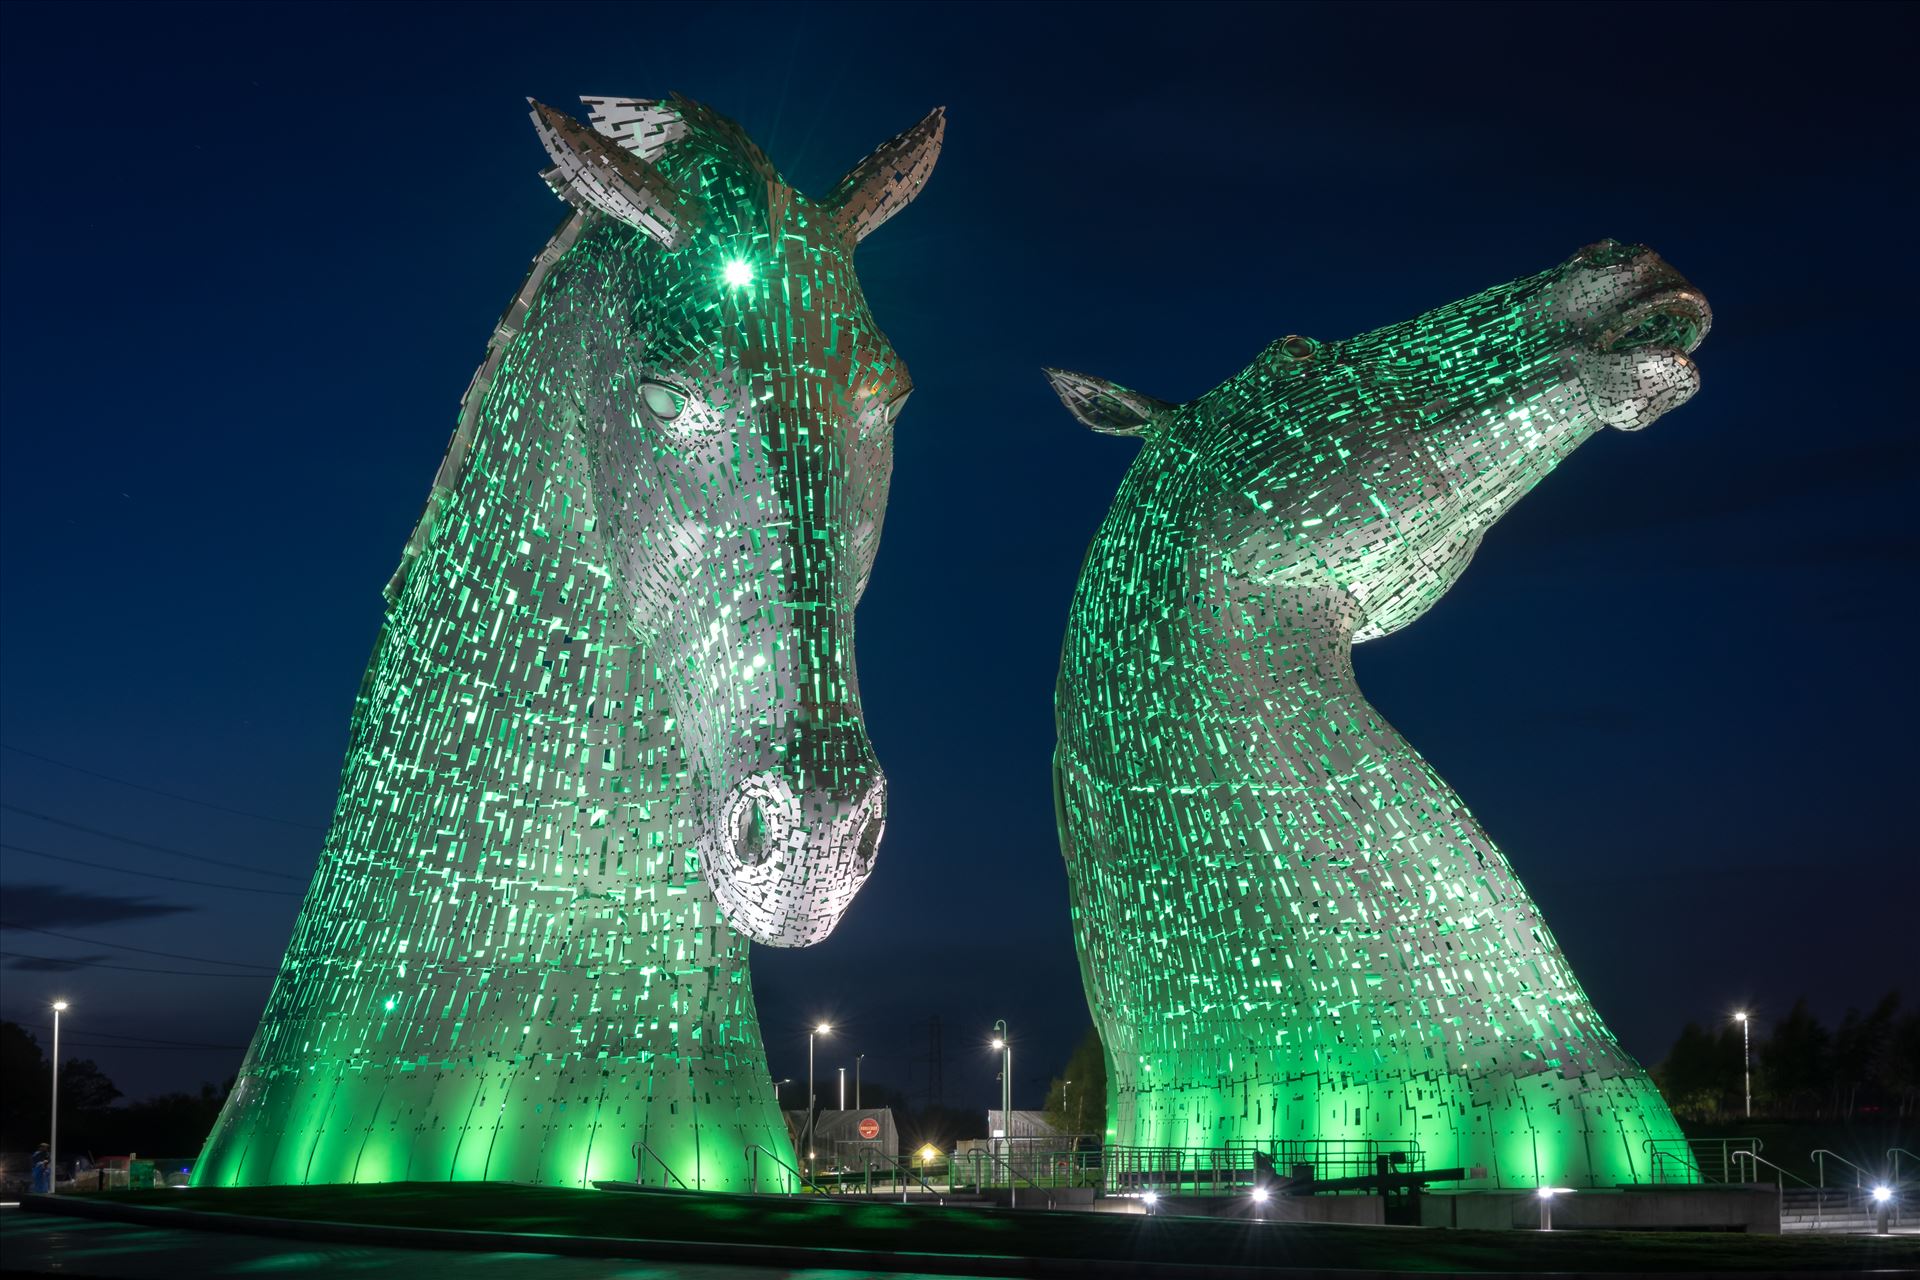 The Kelpies, Falkirk, Scotland - GreenBuilt of structural steel with a stainless steel cladding, The Kelpies are 30 metres high and weigh 300 tonnes each. Construction began in June 2013